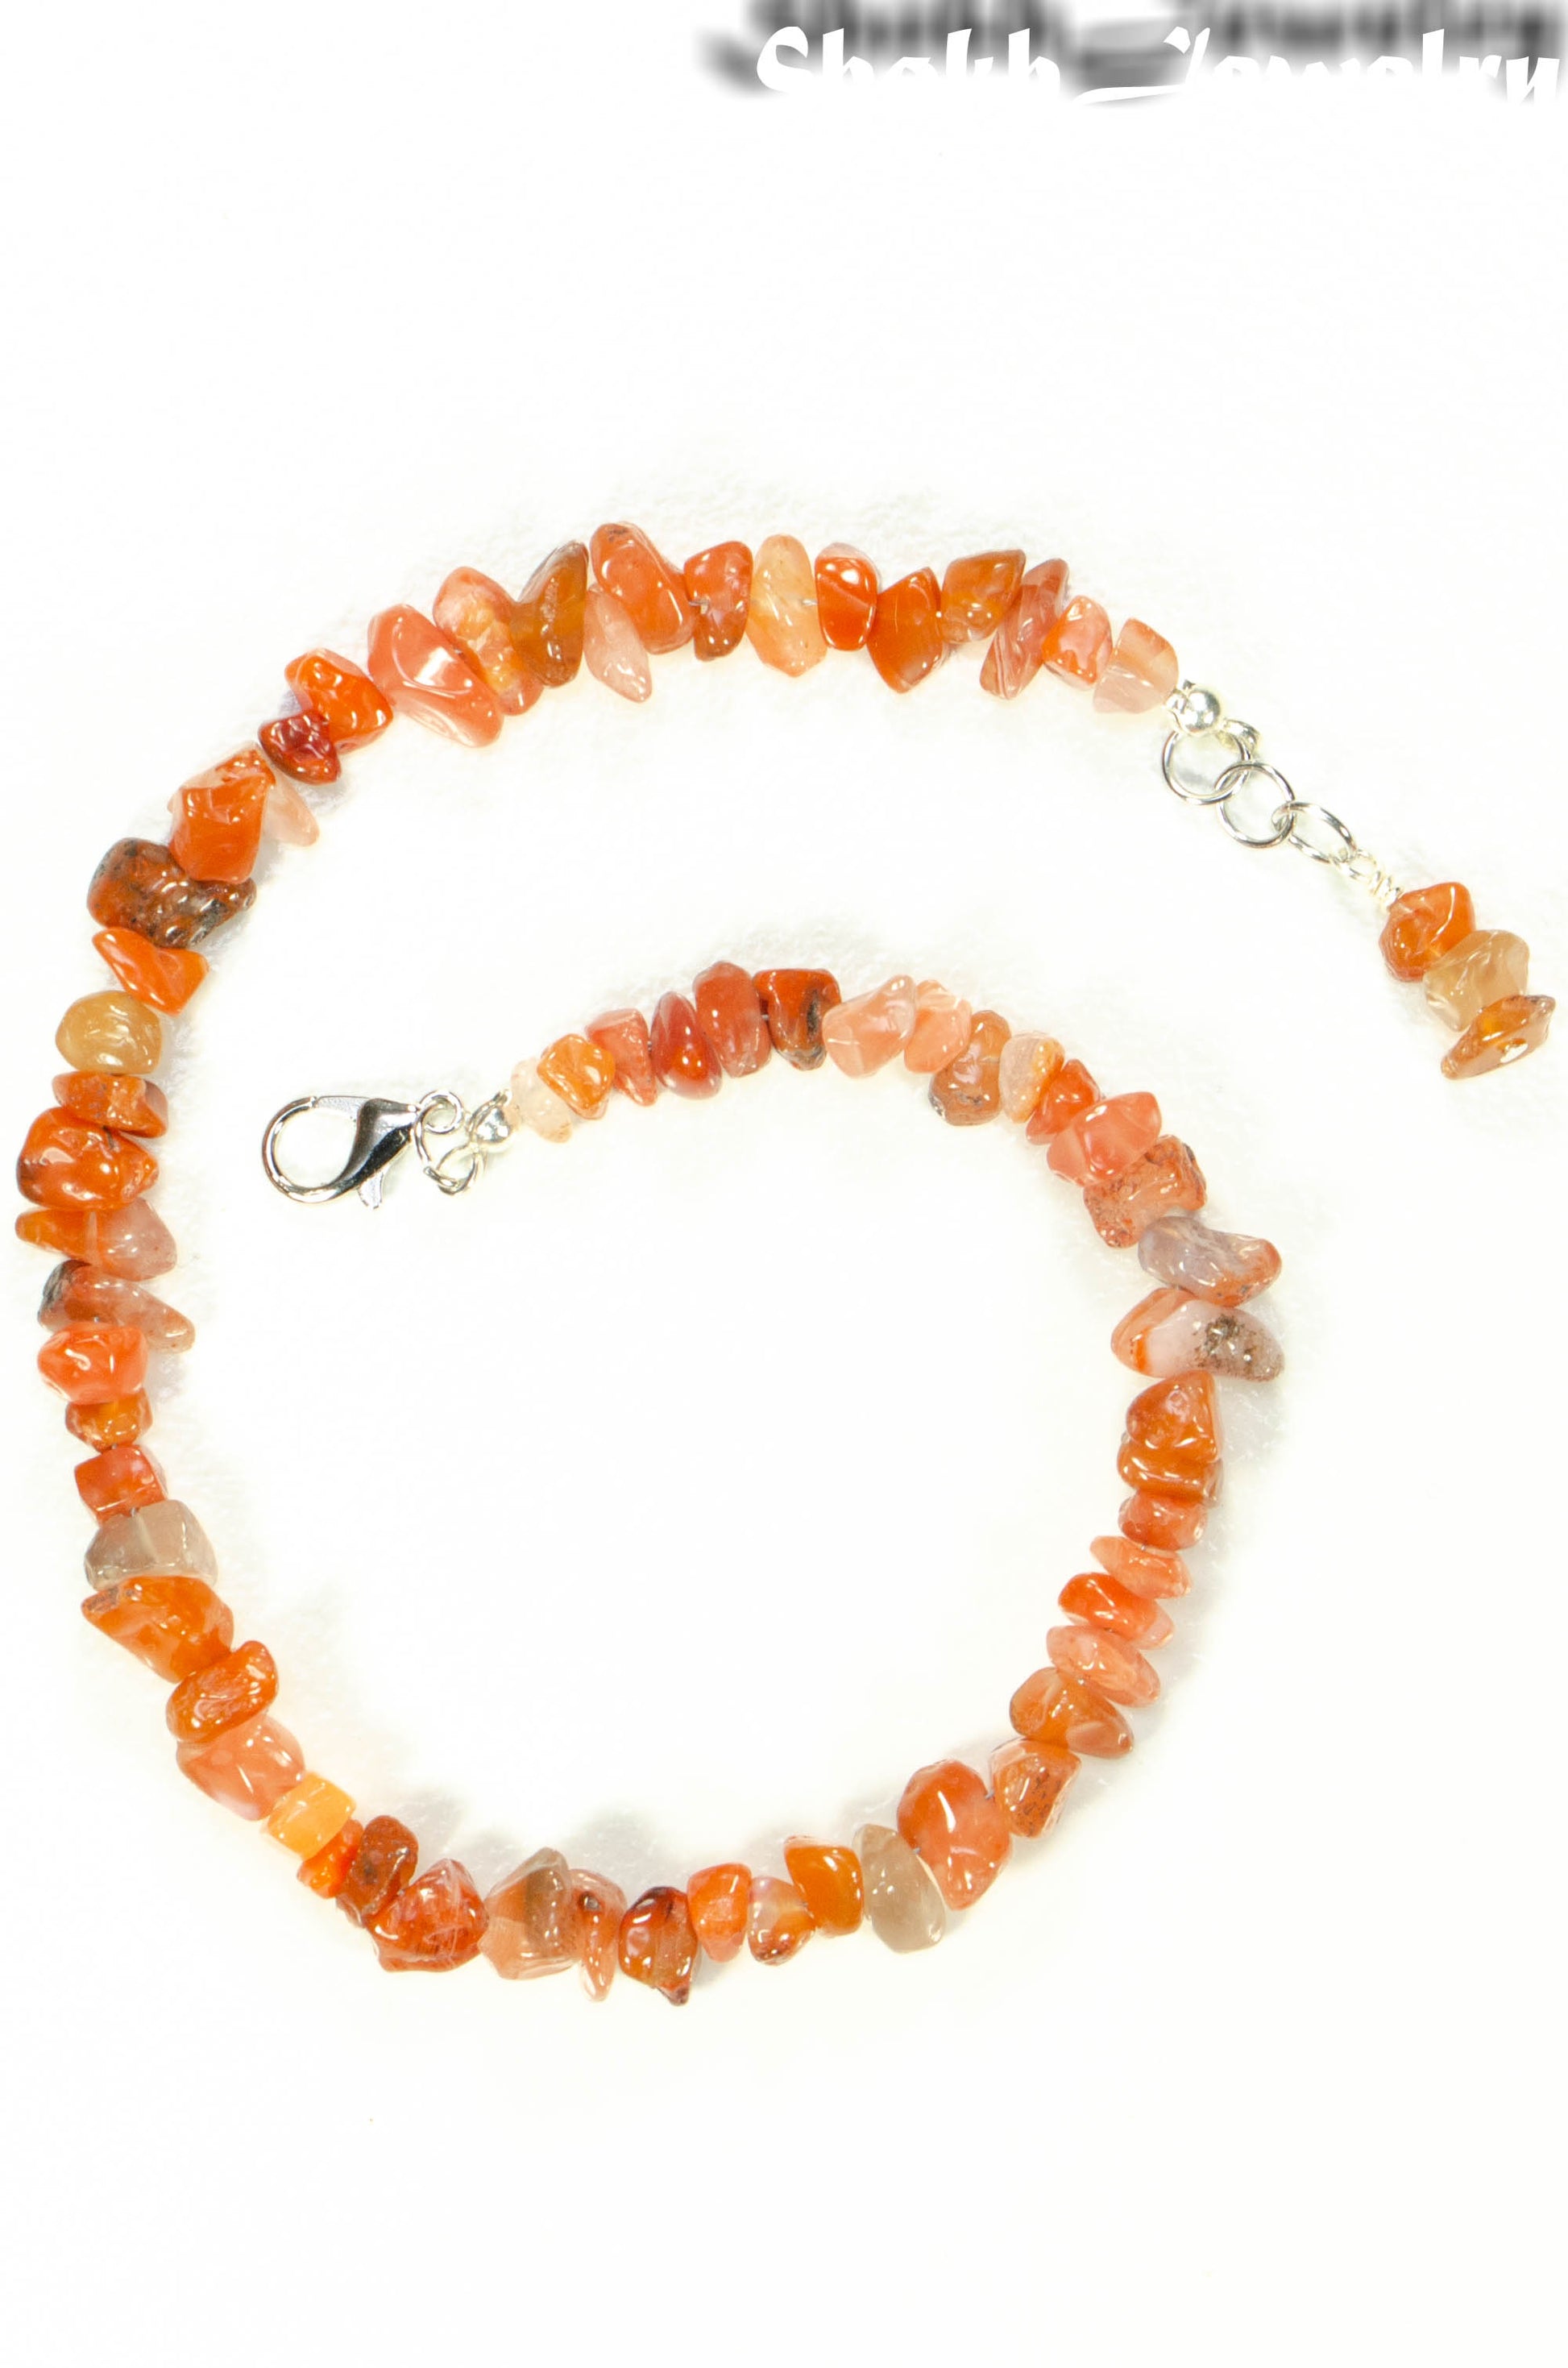 Top view of Natural Carnelian Crystal Chip Choker Necklace.